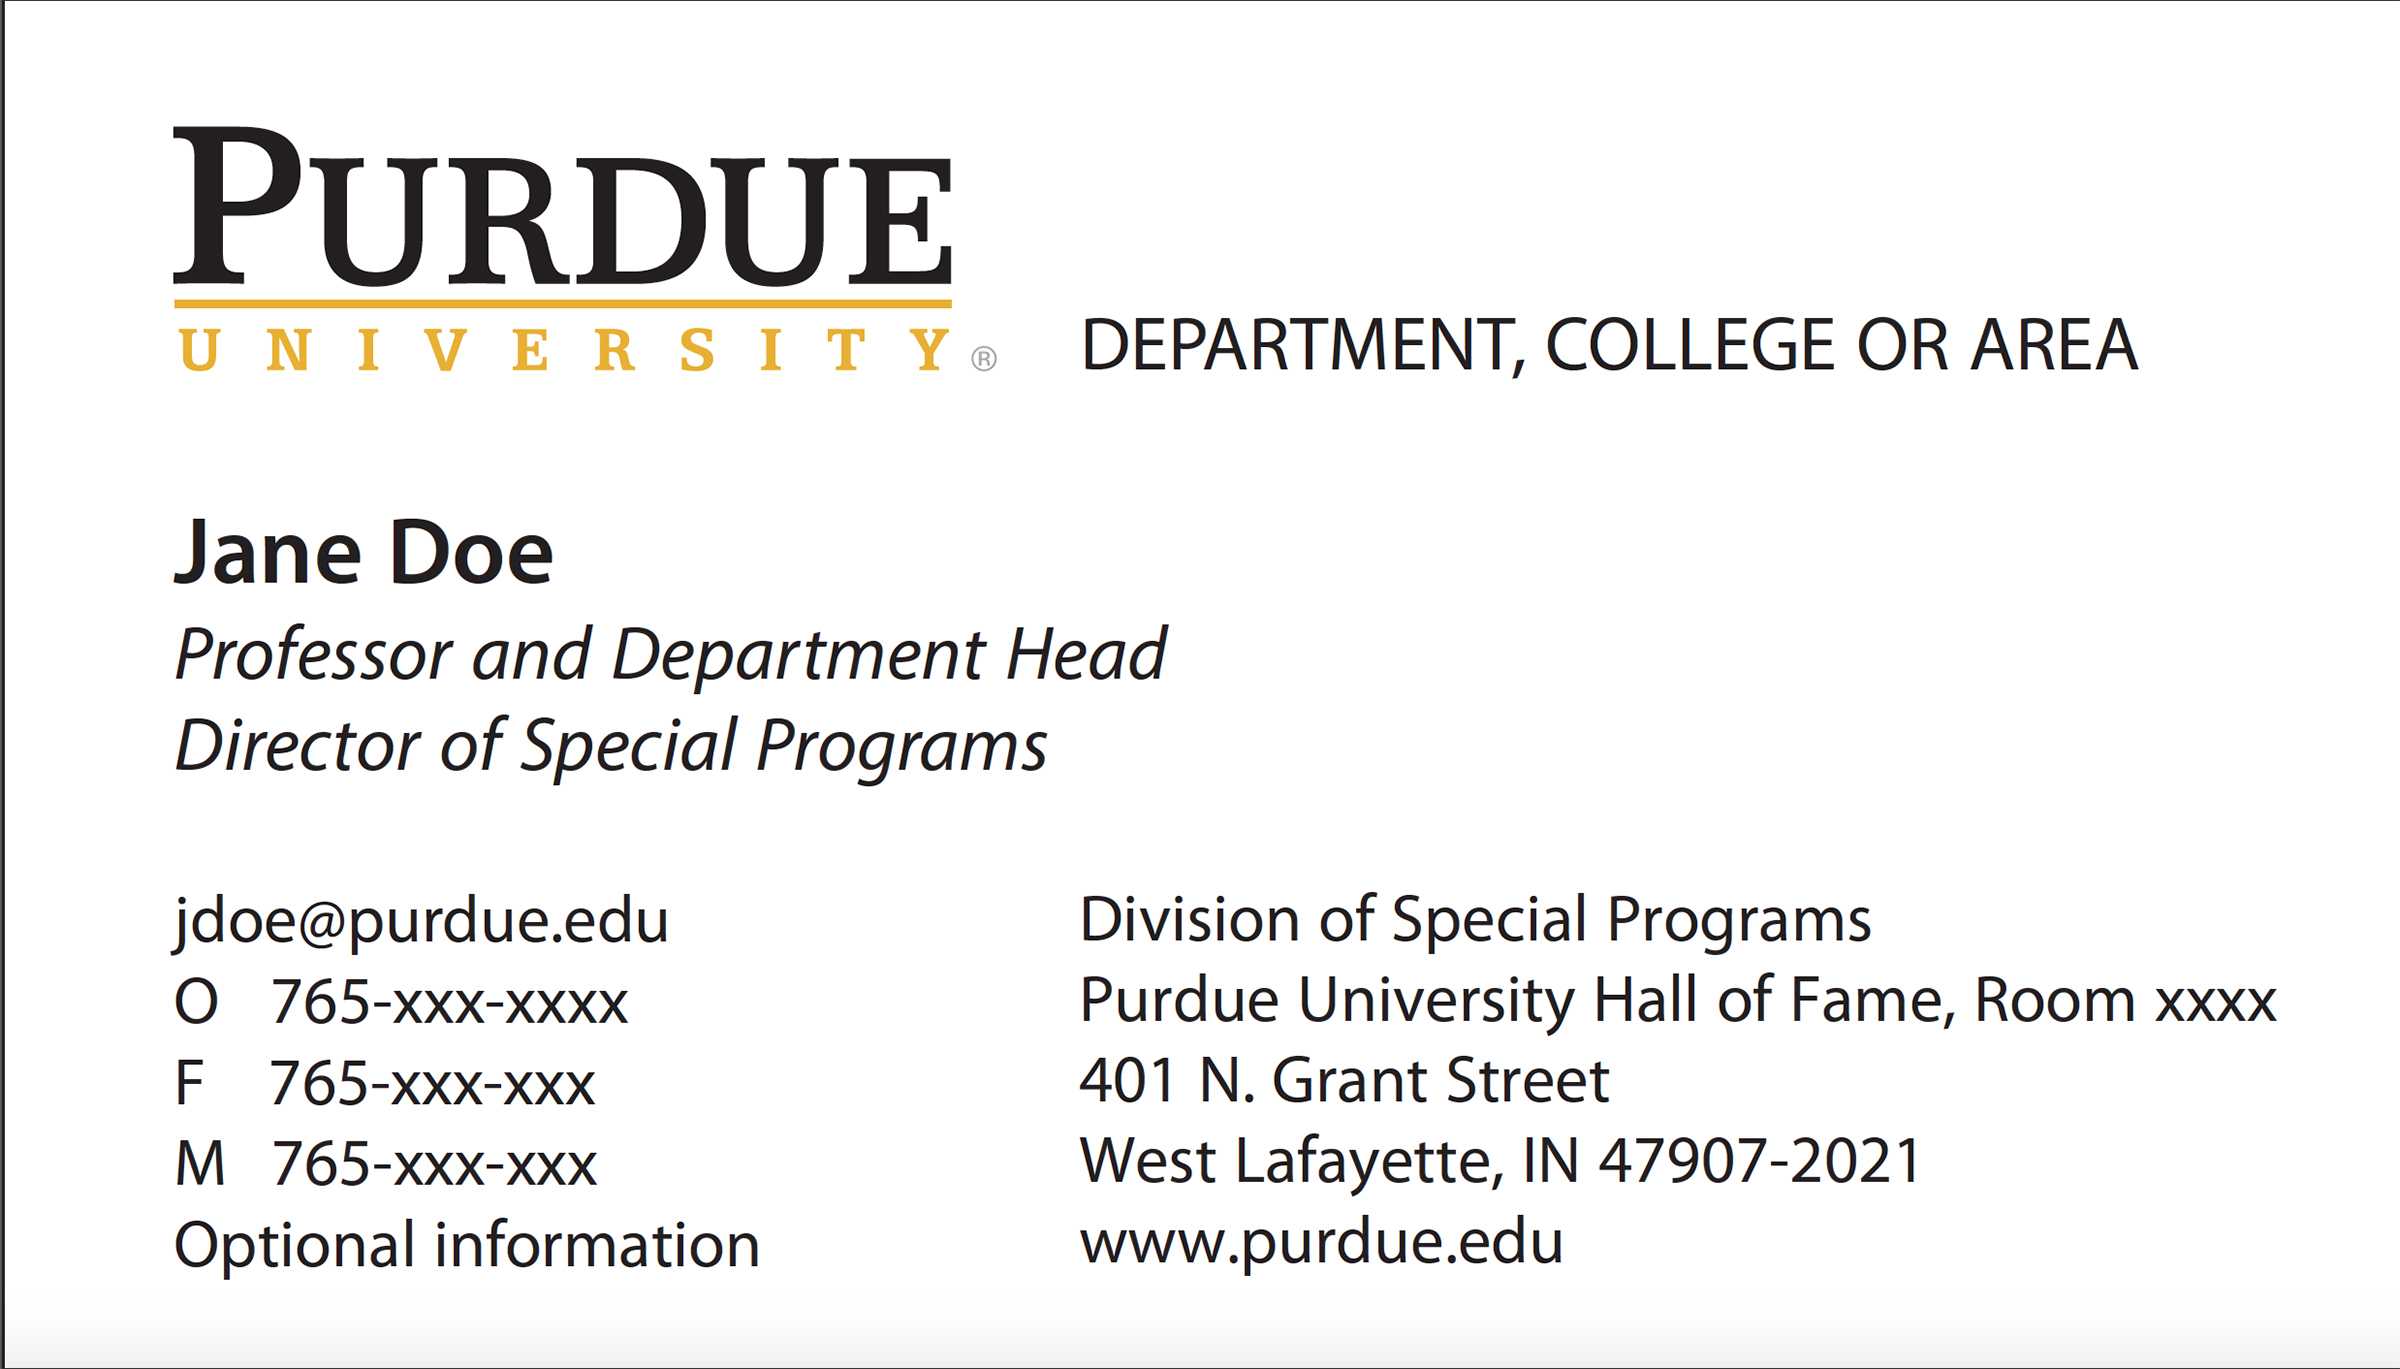 New Business Card Template Now Online - Purdue University News Within Student Business Card Template